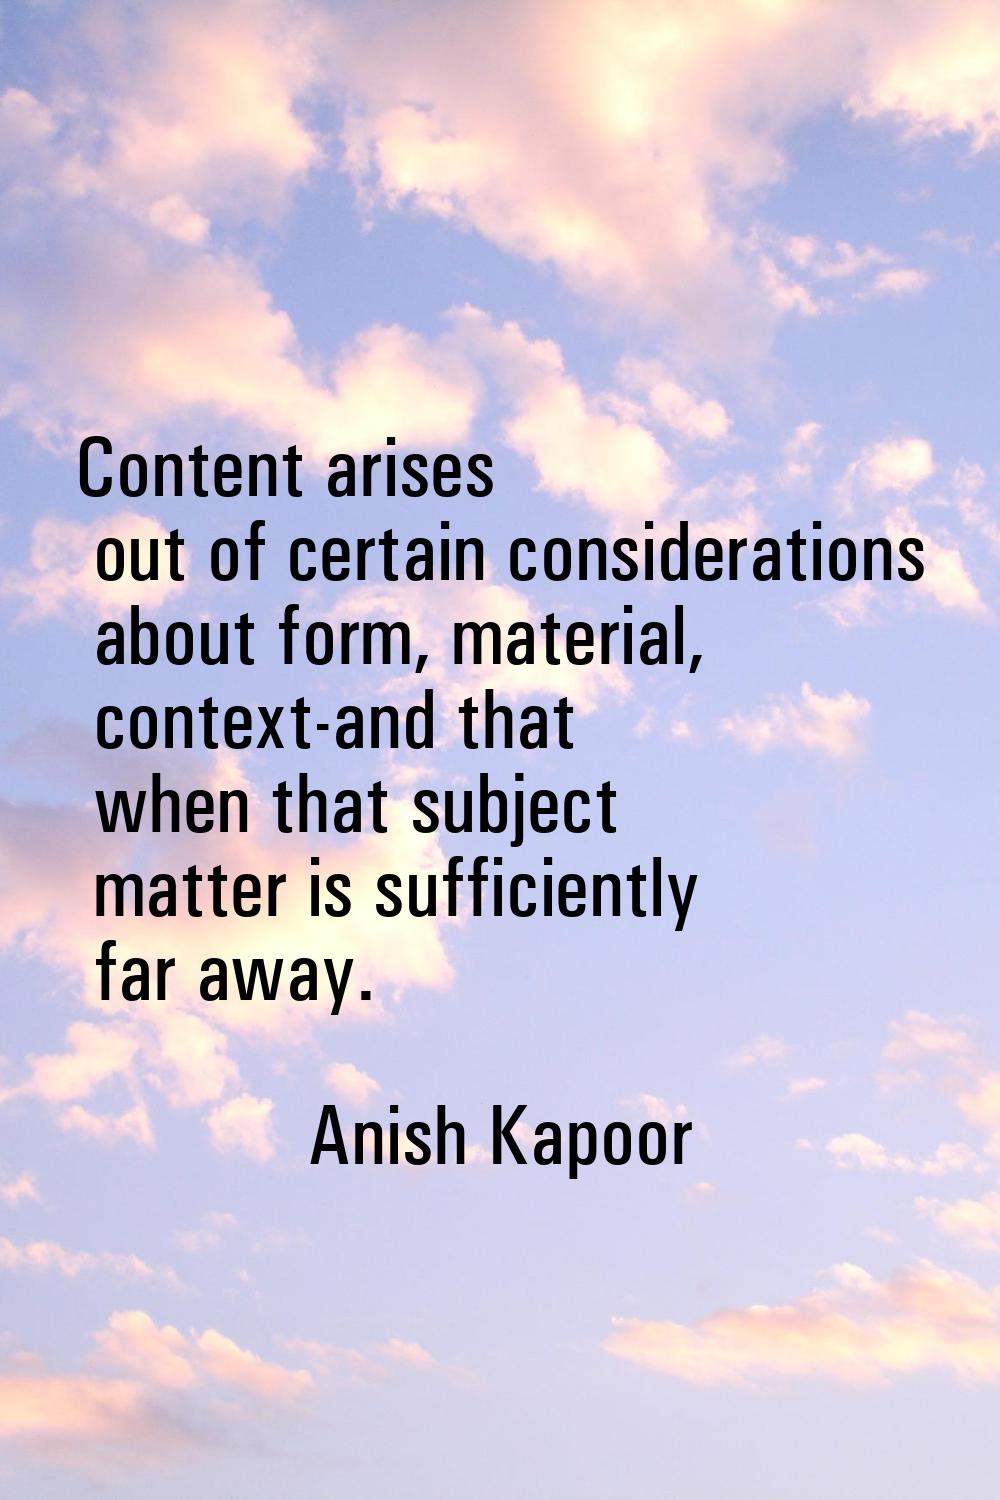 Content arises out of certain considerations about form, material, context-and that when that subje